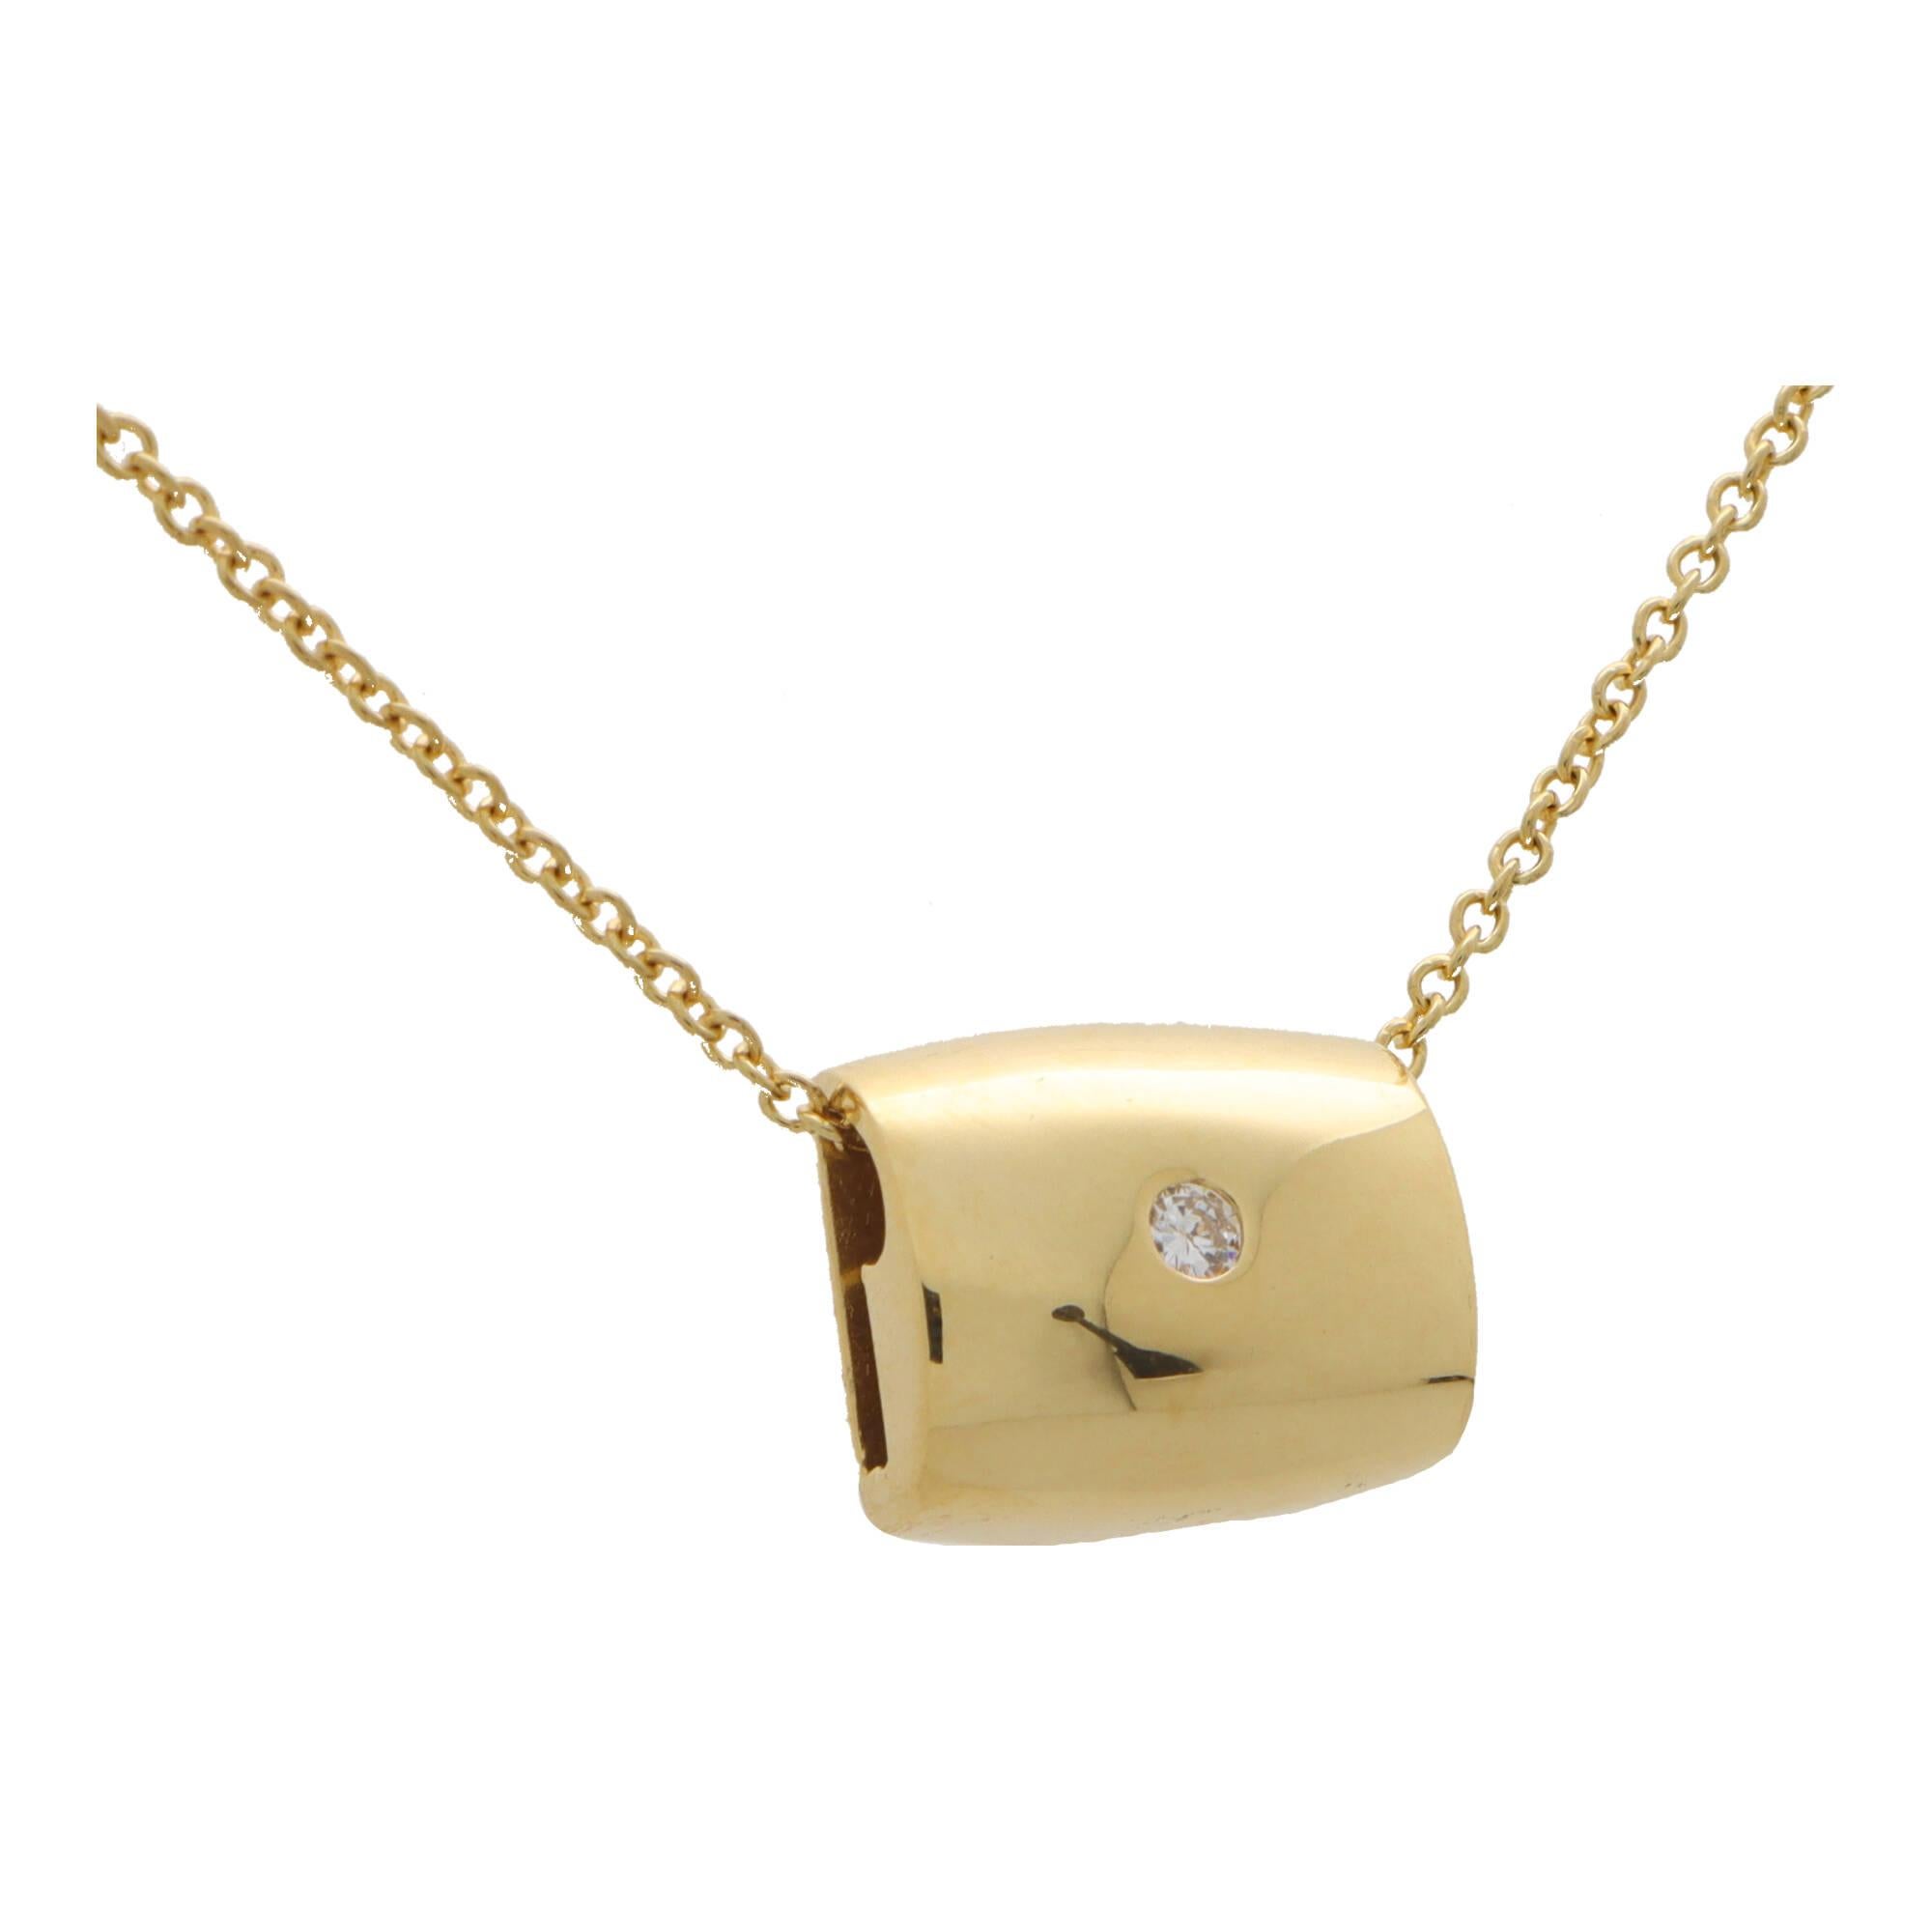 A stylish vintage 1990’s Piaget diamond pendant set in 18k yellow gold.

The pendant is composed of a large heavy weight elongated cushion motif, rub over set to the centre with a round brilliant cut diamond. The pendant is threaded and hangs from